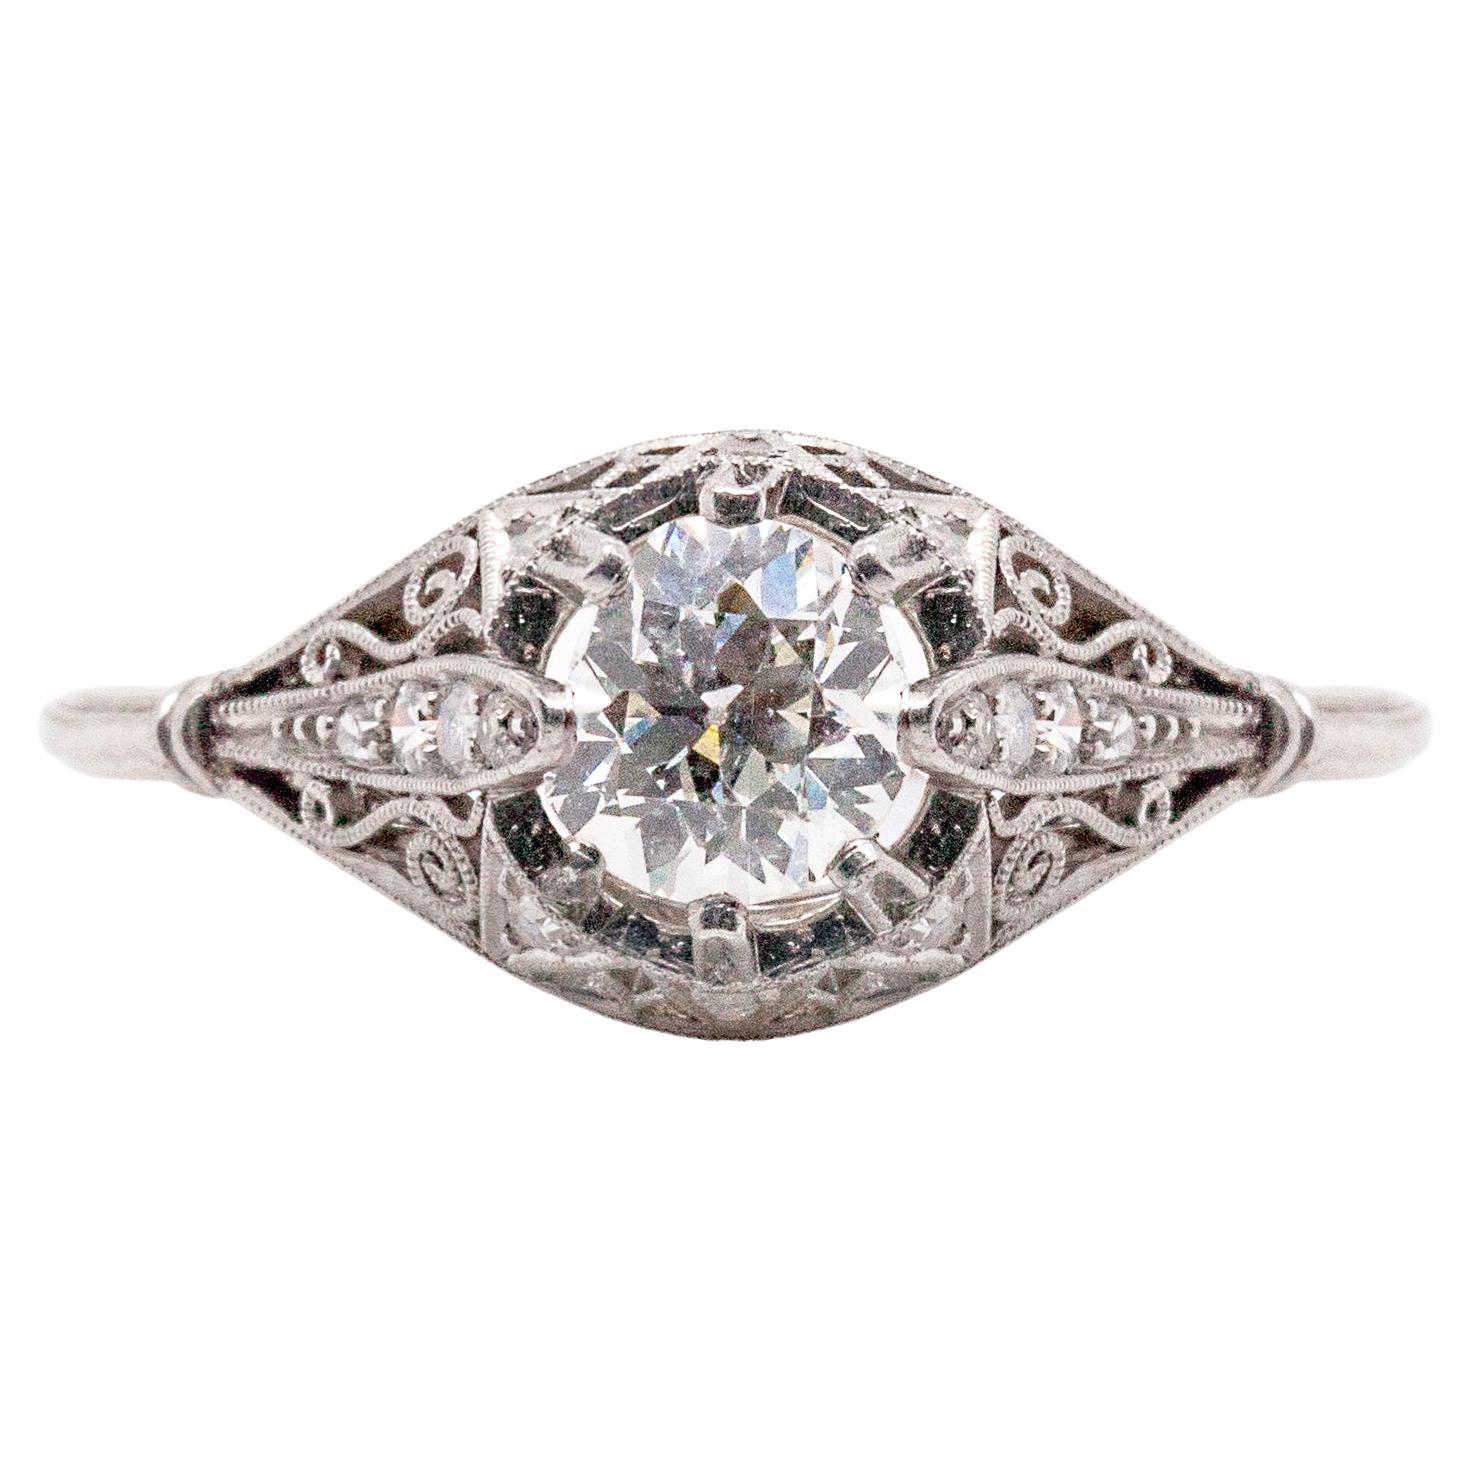 We defy anyone not to fall in love with this breathtaking handmade antique ring. A beautiful Old European Cut diamond weighing an estimated 0.80 carats is set on top of an intricate millgrained filigree gallery, set with an estimated 0.14 carats of